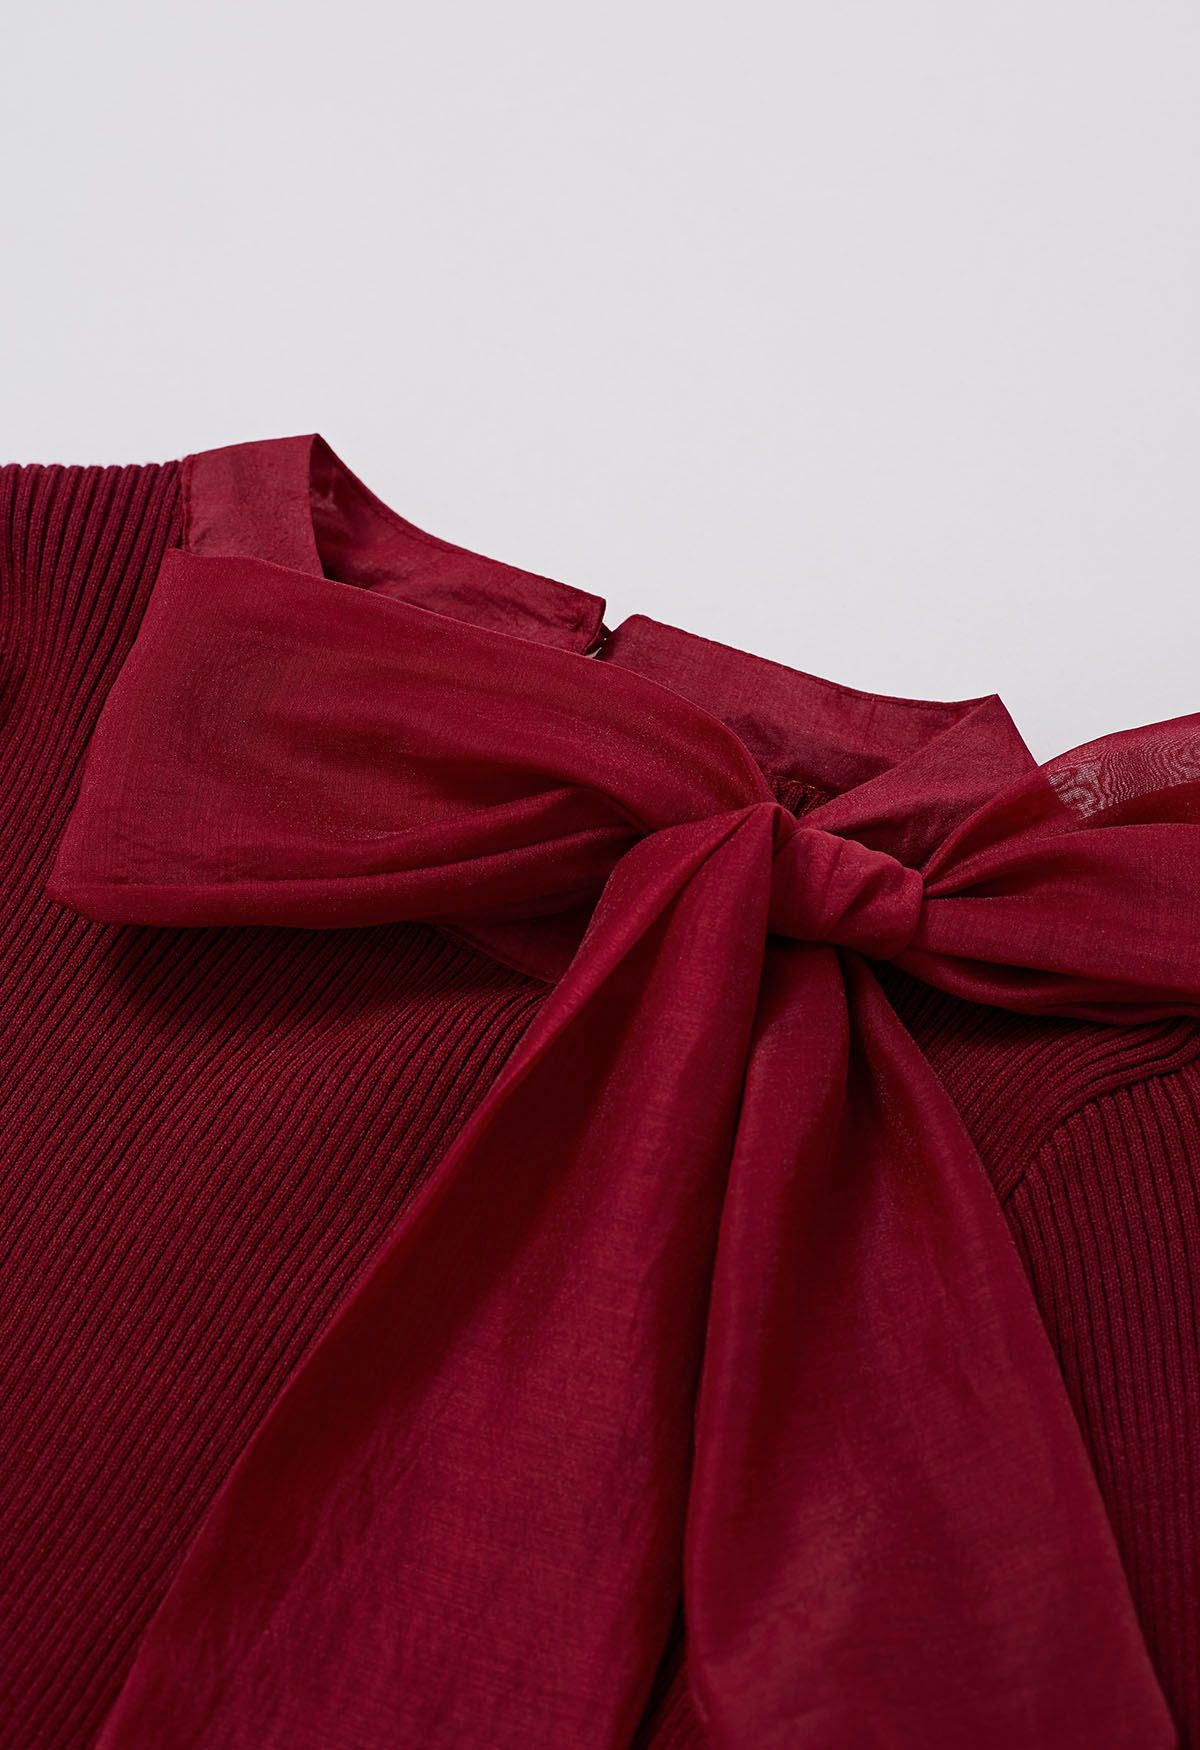 Fancy with Bowknot Knit Top in Burgundy